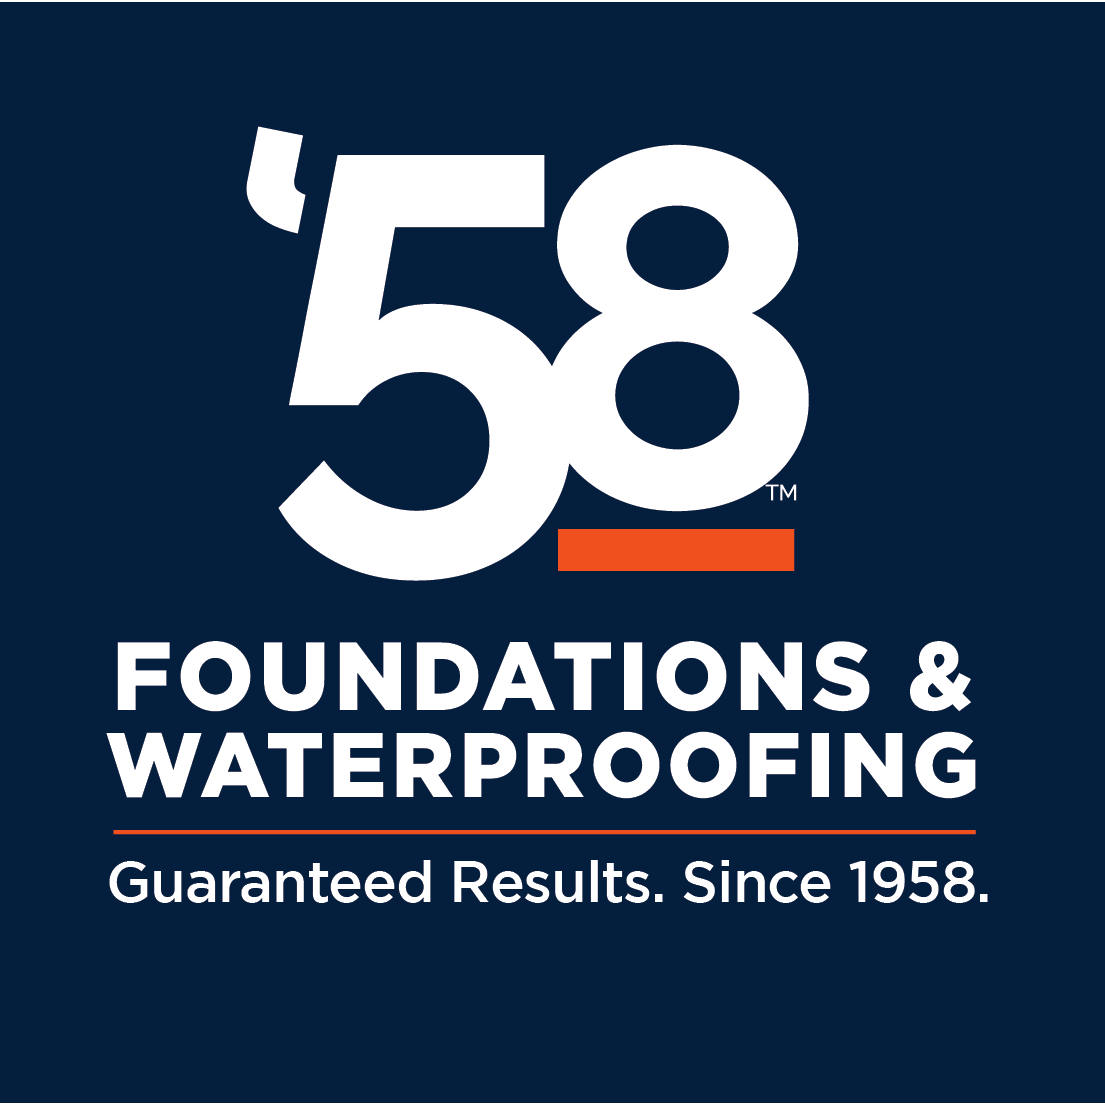 58 Foundations & Waterproofing - Charlotte, NC - (704)850-6343 | ShowMeLocal.com